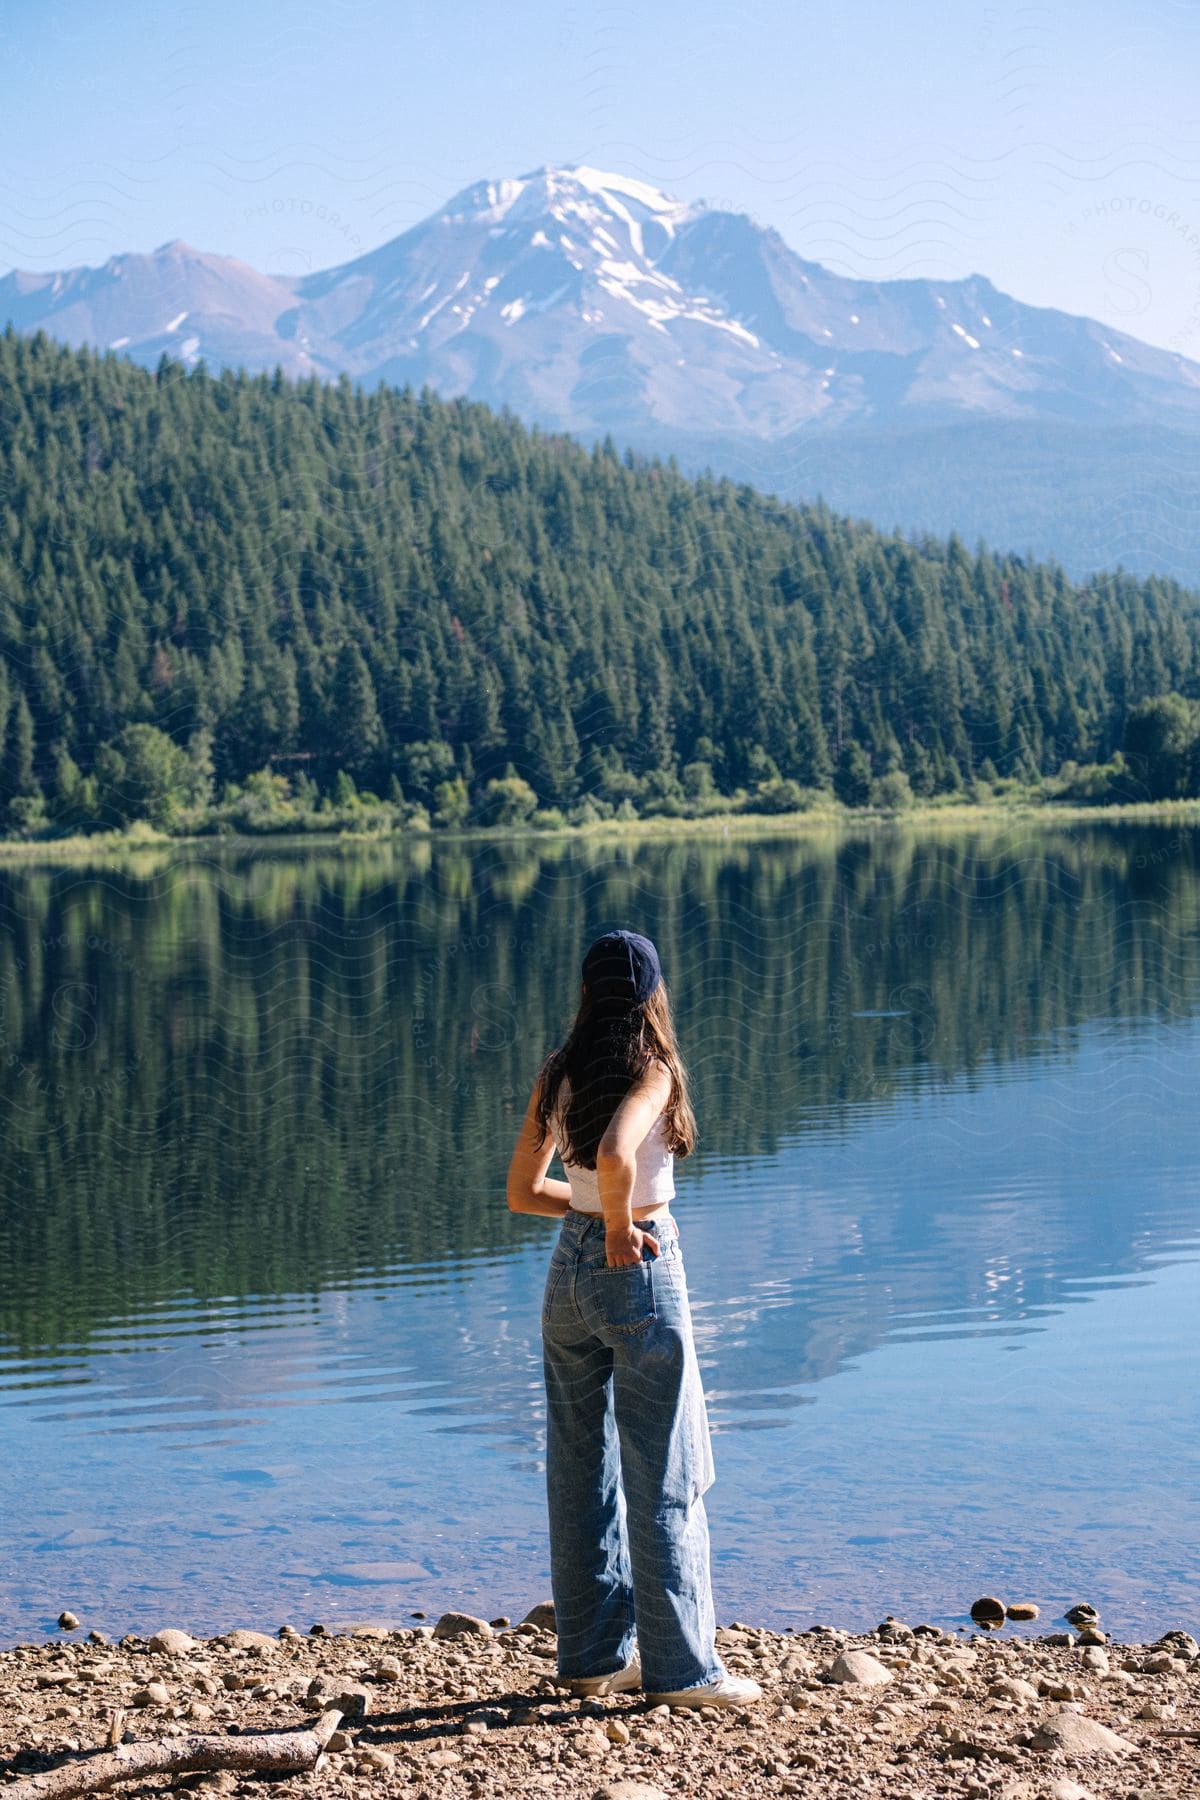 On a sunny day, a woman wearing jeans, sneakers, and a hat stands on the river bank, gazing at the river. Tall trees surround her on one side, with a mountain in the backdrop.